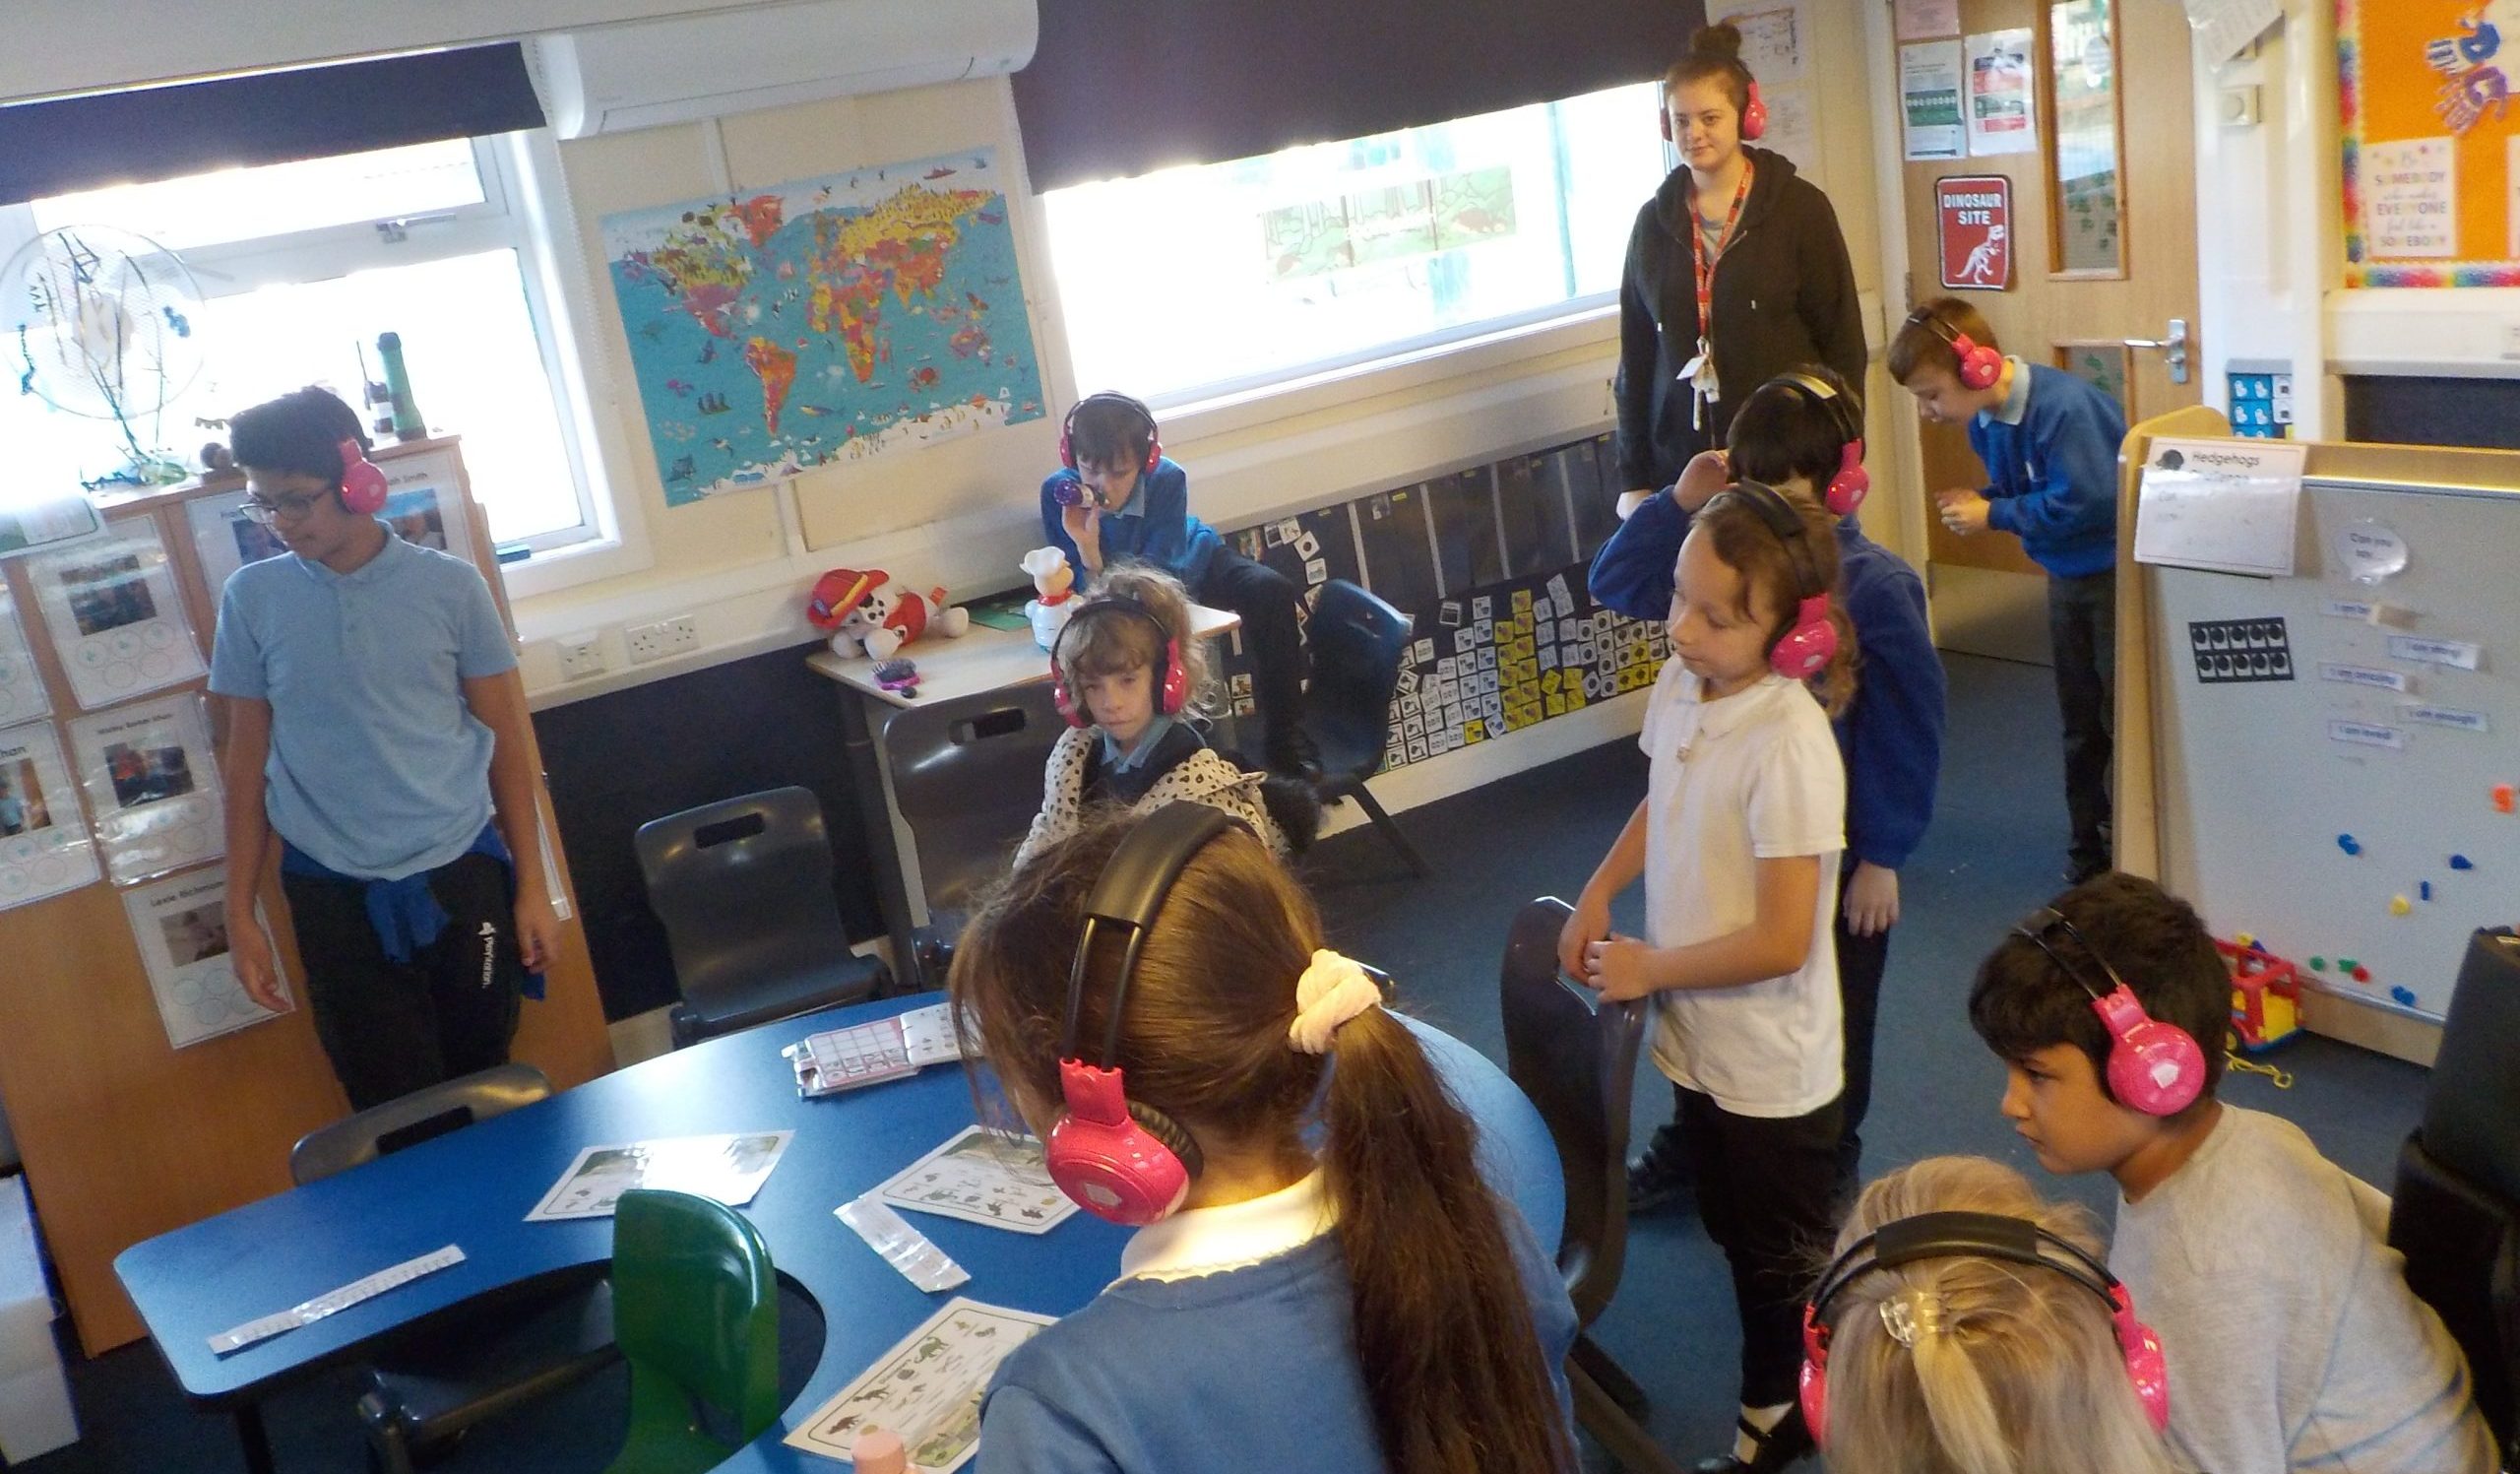 A group of children from Chellow Heights Special School use Now Press Play together in their classroom